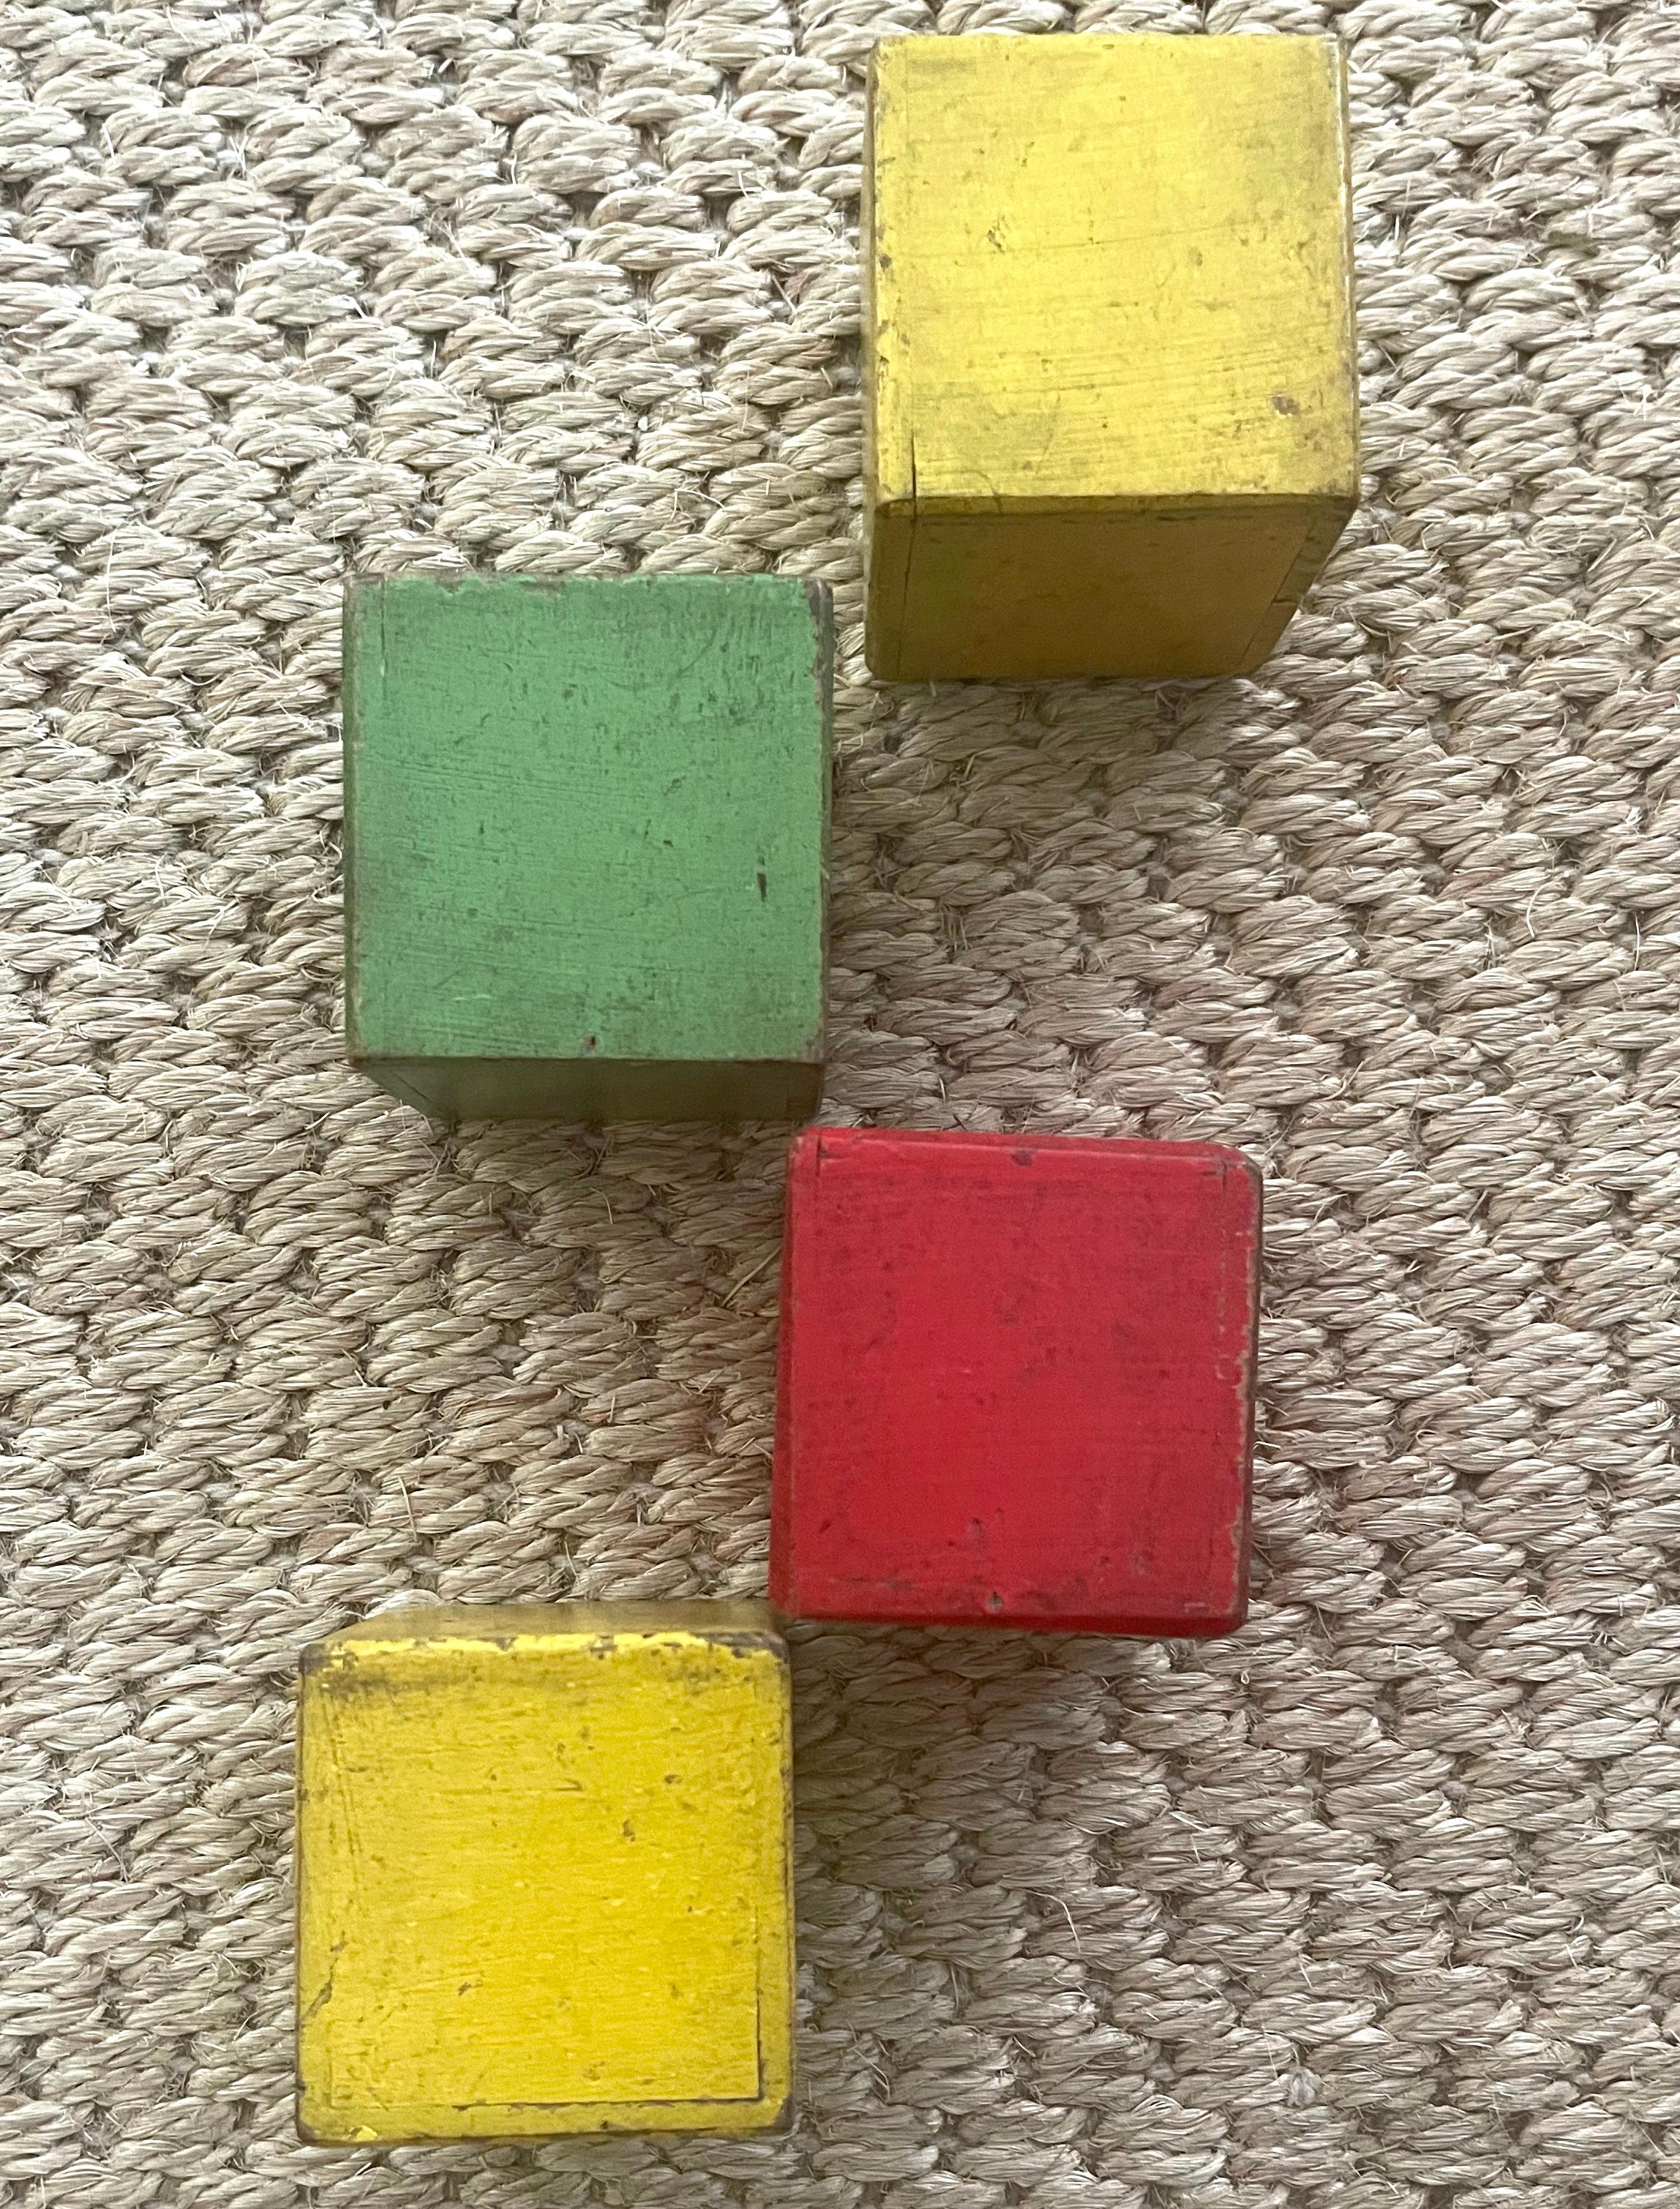 Square painted wood German children’s rattle blocks. Four wood painted blocks in yellow, red and green designed with an internal rattle element suitable for infants. Germany, 1930s.